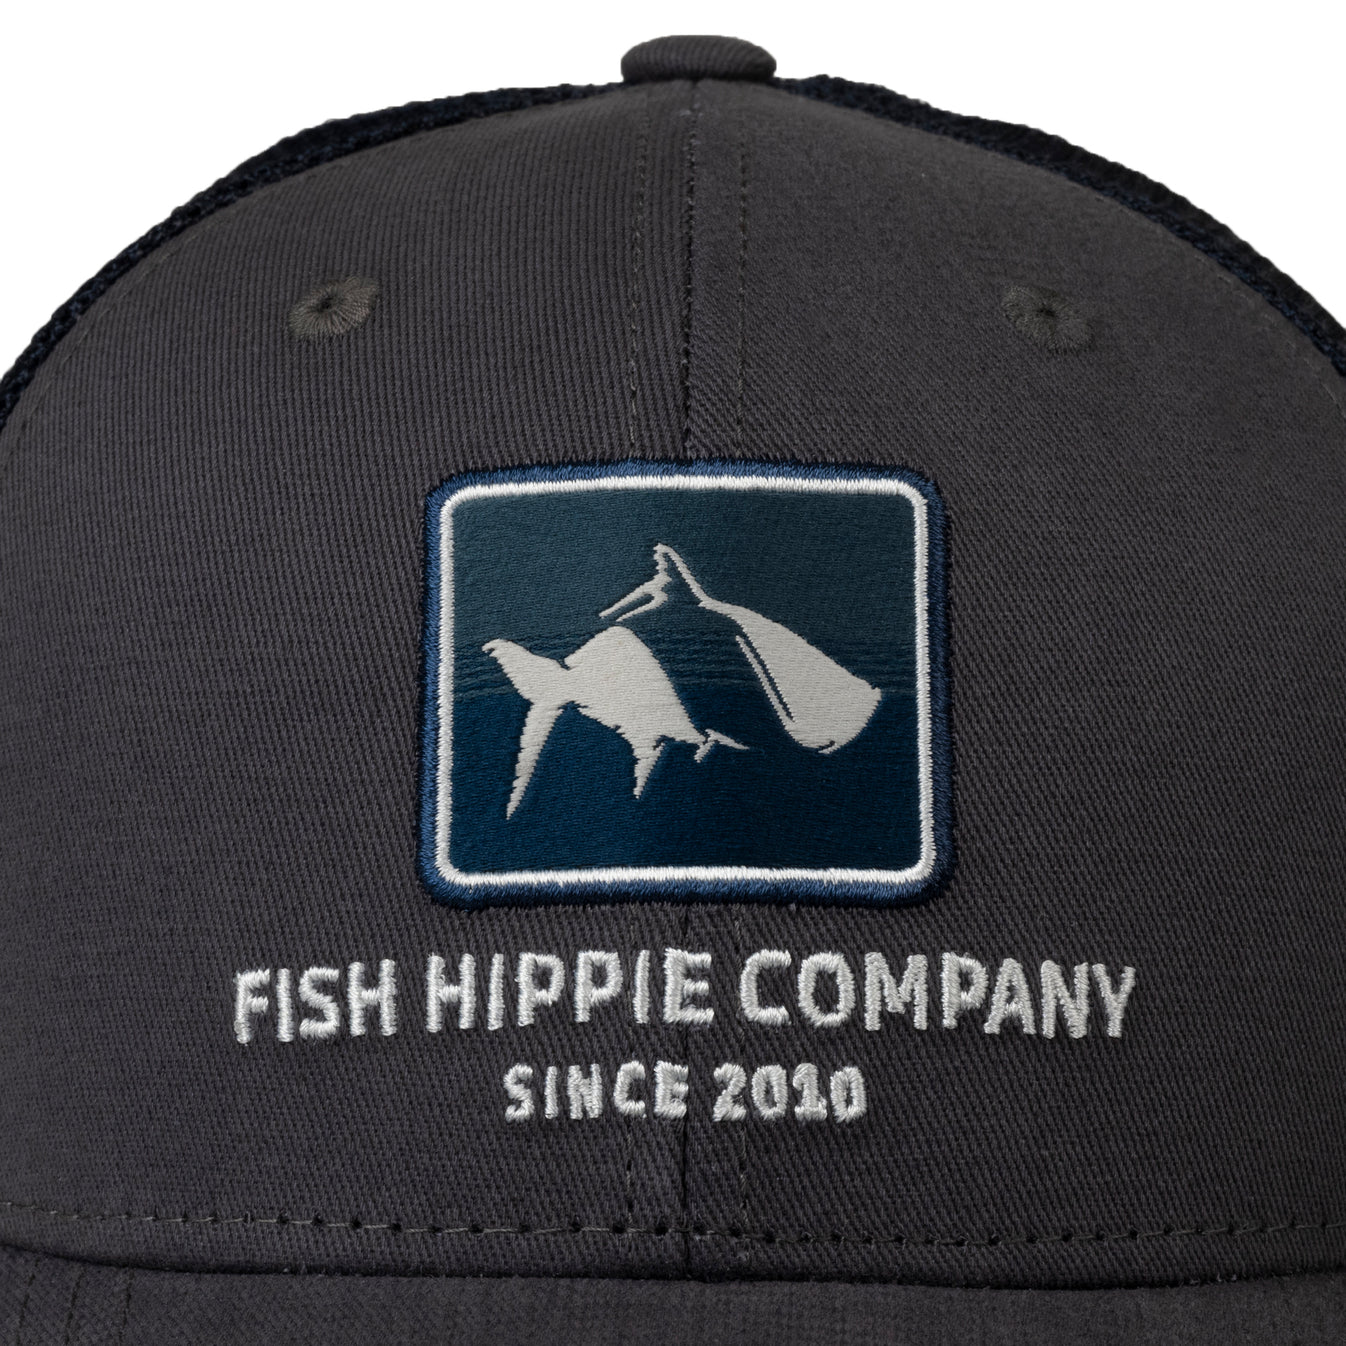 Fish Hippie Hat Trucker Style Cap snap back Fishing Boat Adjustable Size  Green